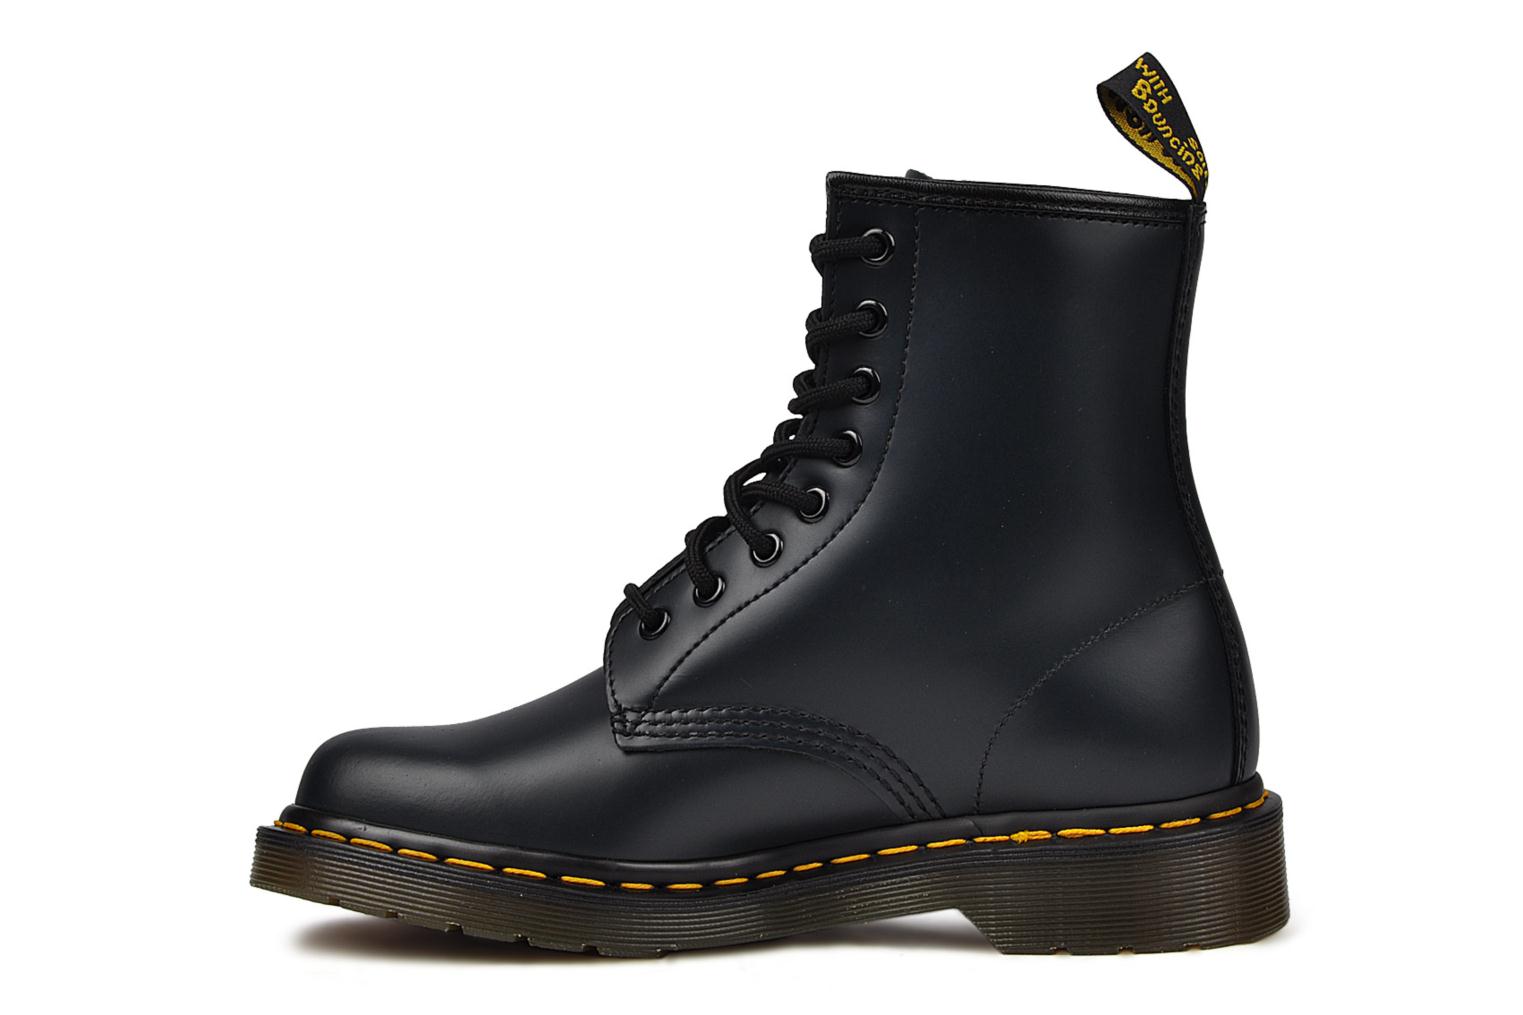 Dr. Martens 1460 W Ankle boots in Blue at Sarenza.co.uk (47885)